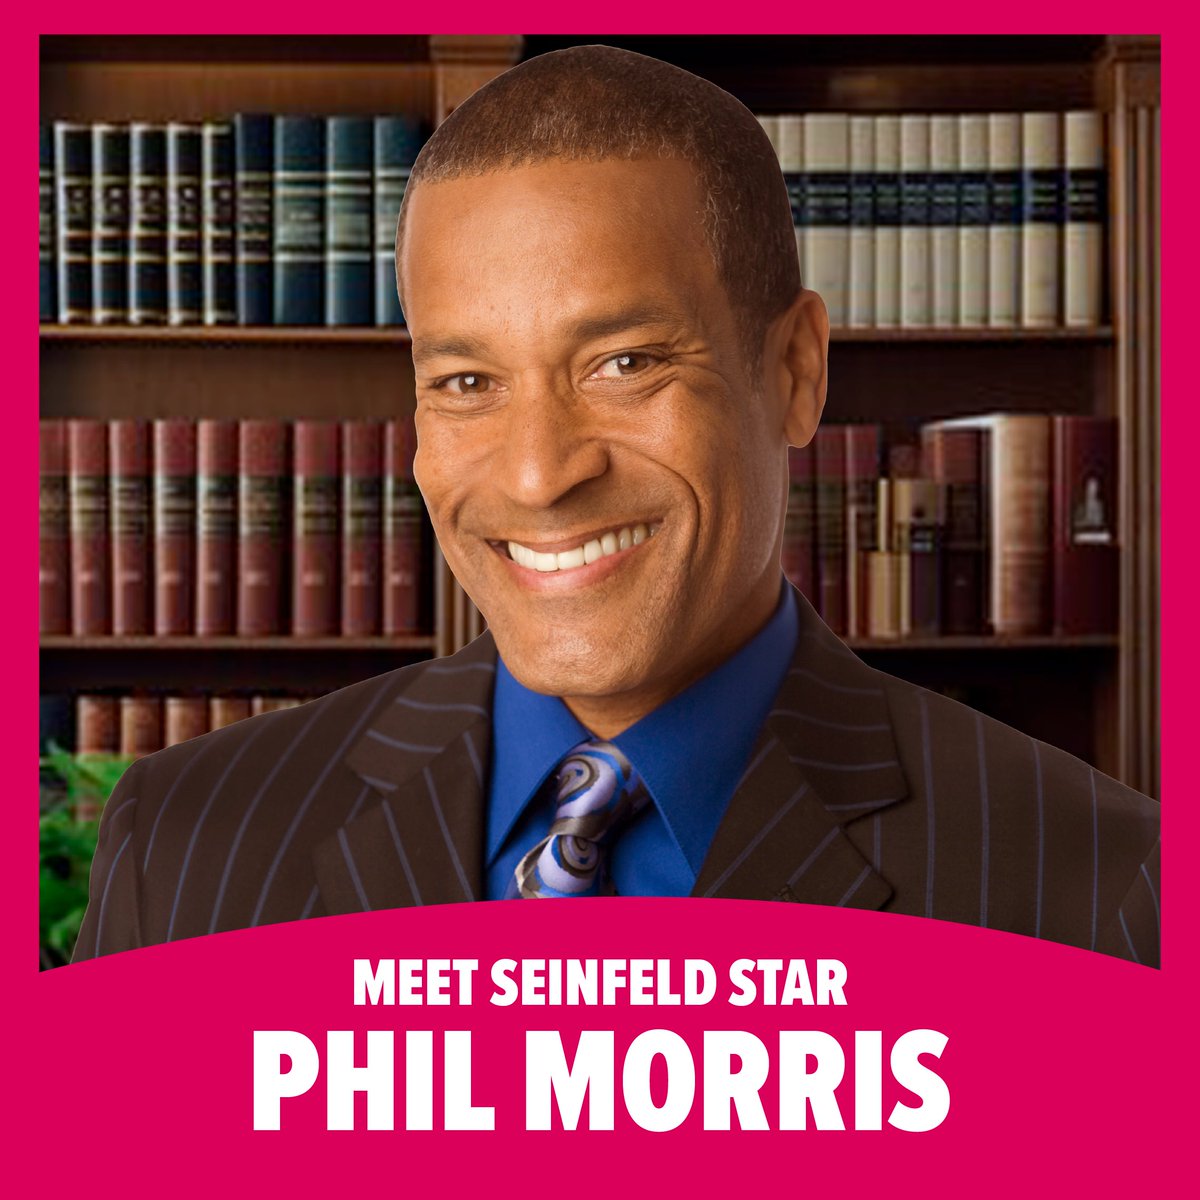 If you need a good lawyer, we have just the guy for you. Phil Morris (Jackie Chiles) from #Seinfeld is ready to take on any case at #FANEXPOChicago this August. Grab your #tickets today: spr.ly/6018bRLjp